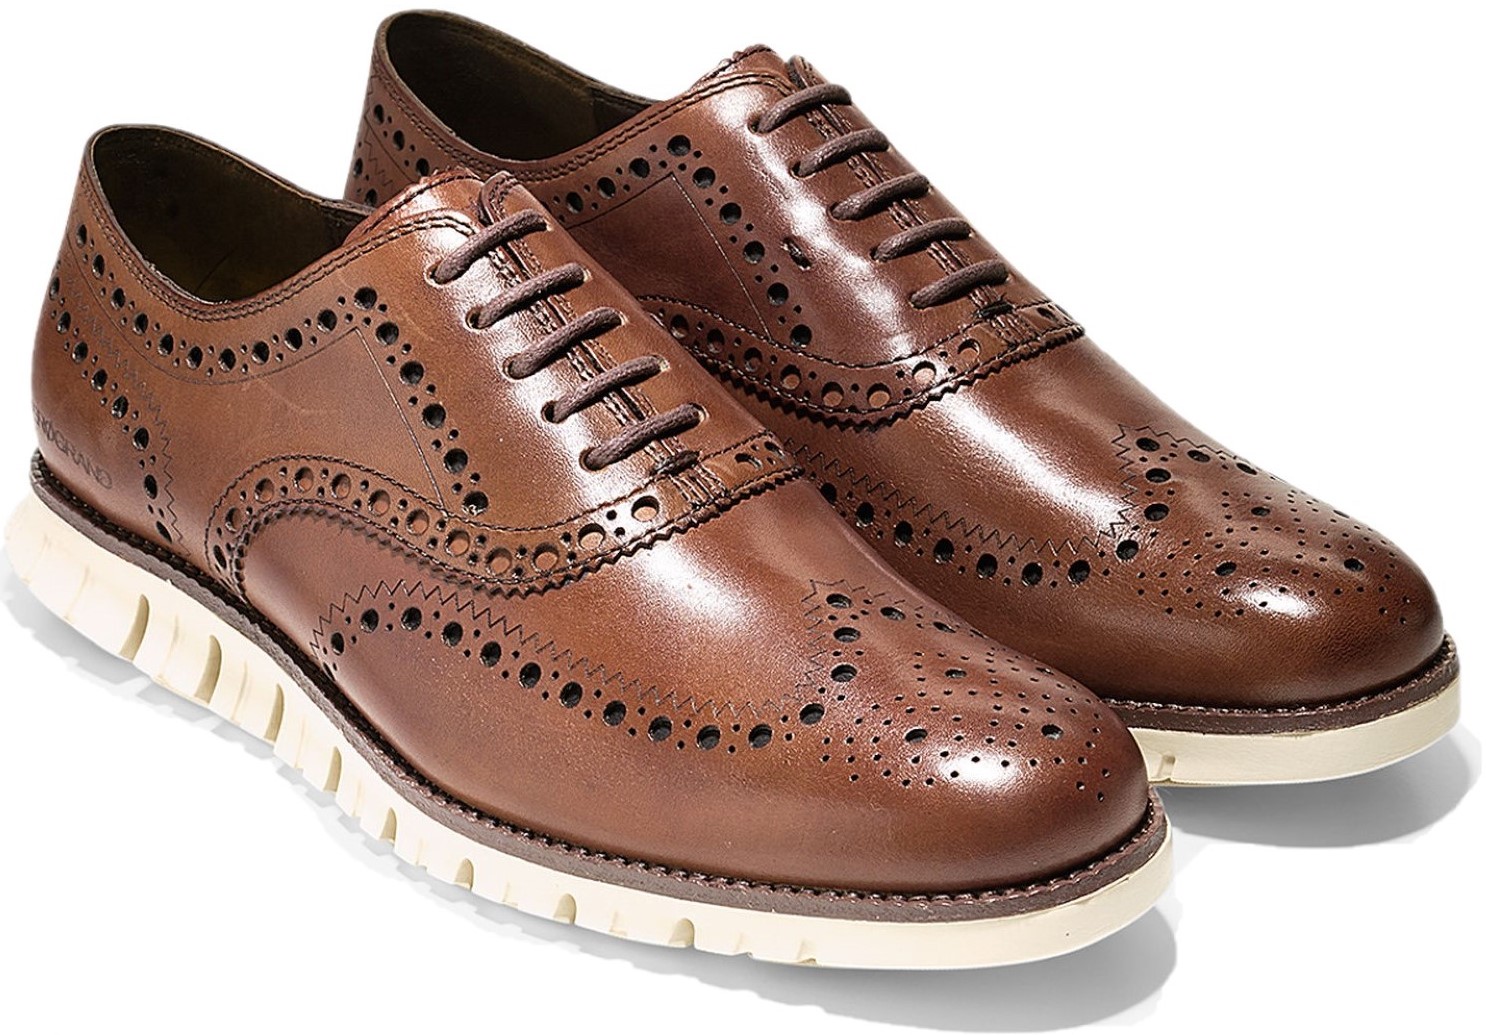 Cole Haan Men's Zerogrand Wing Oxford, starts at $171